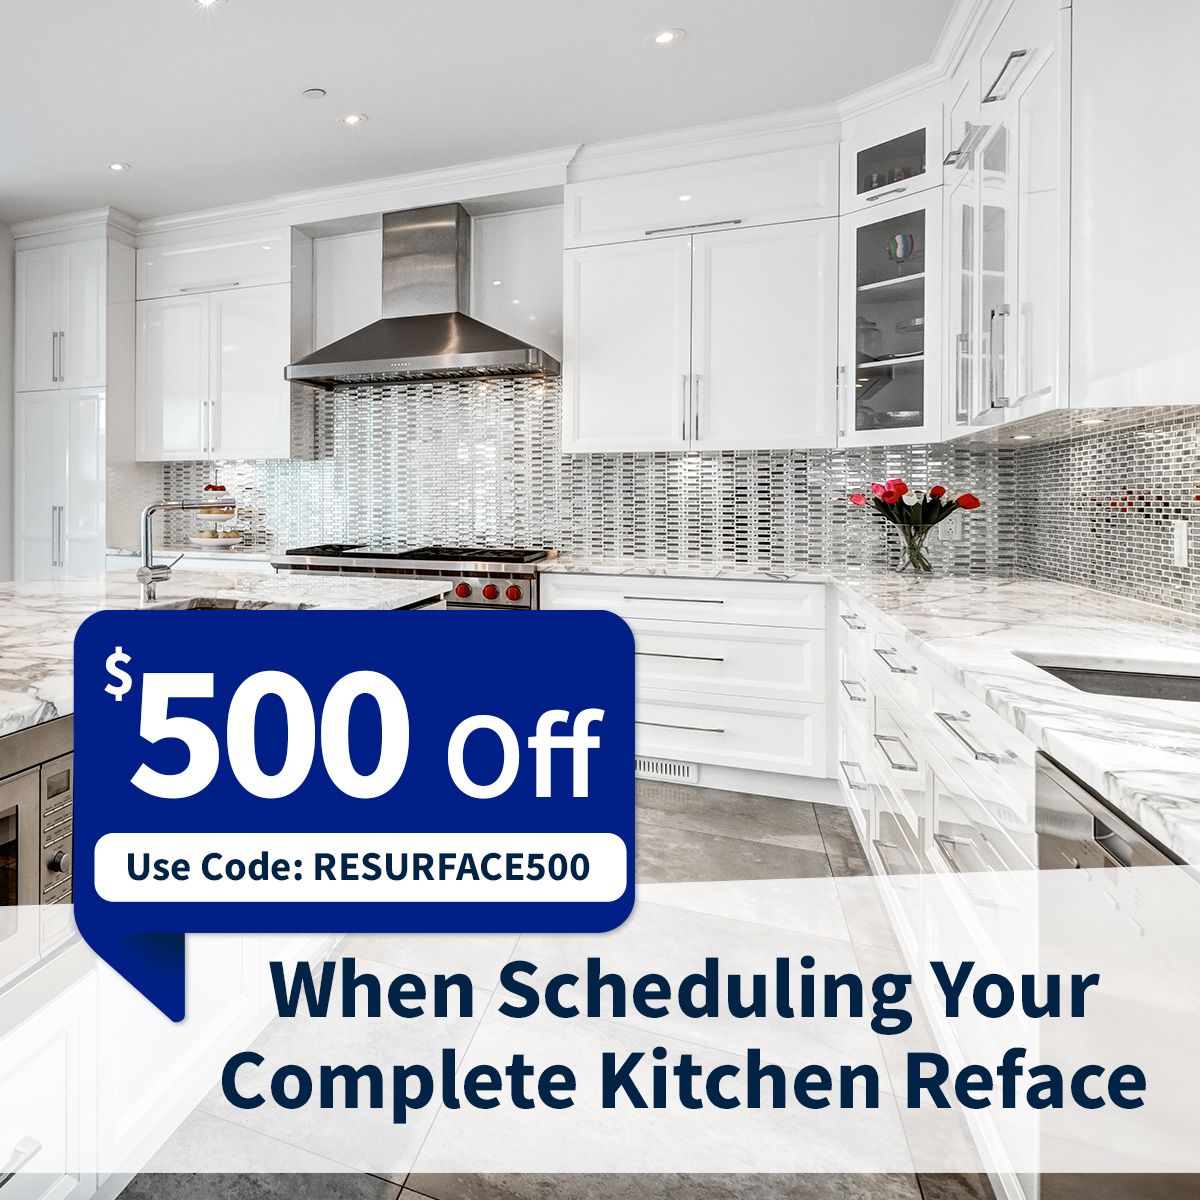 Schedule your complete kitchen reface today and receive $500 off